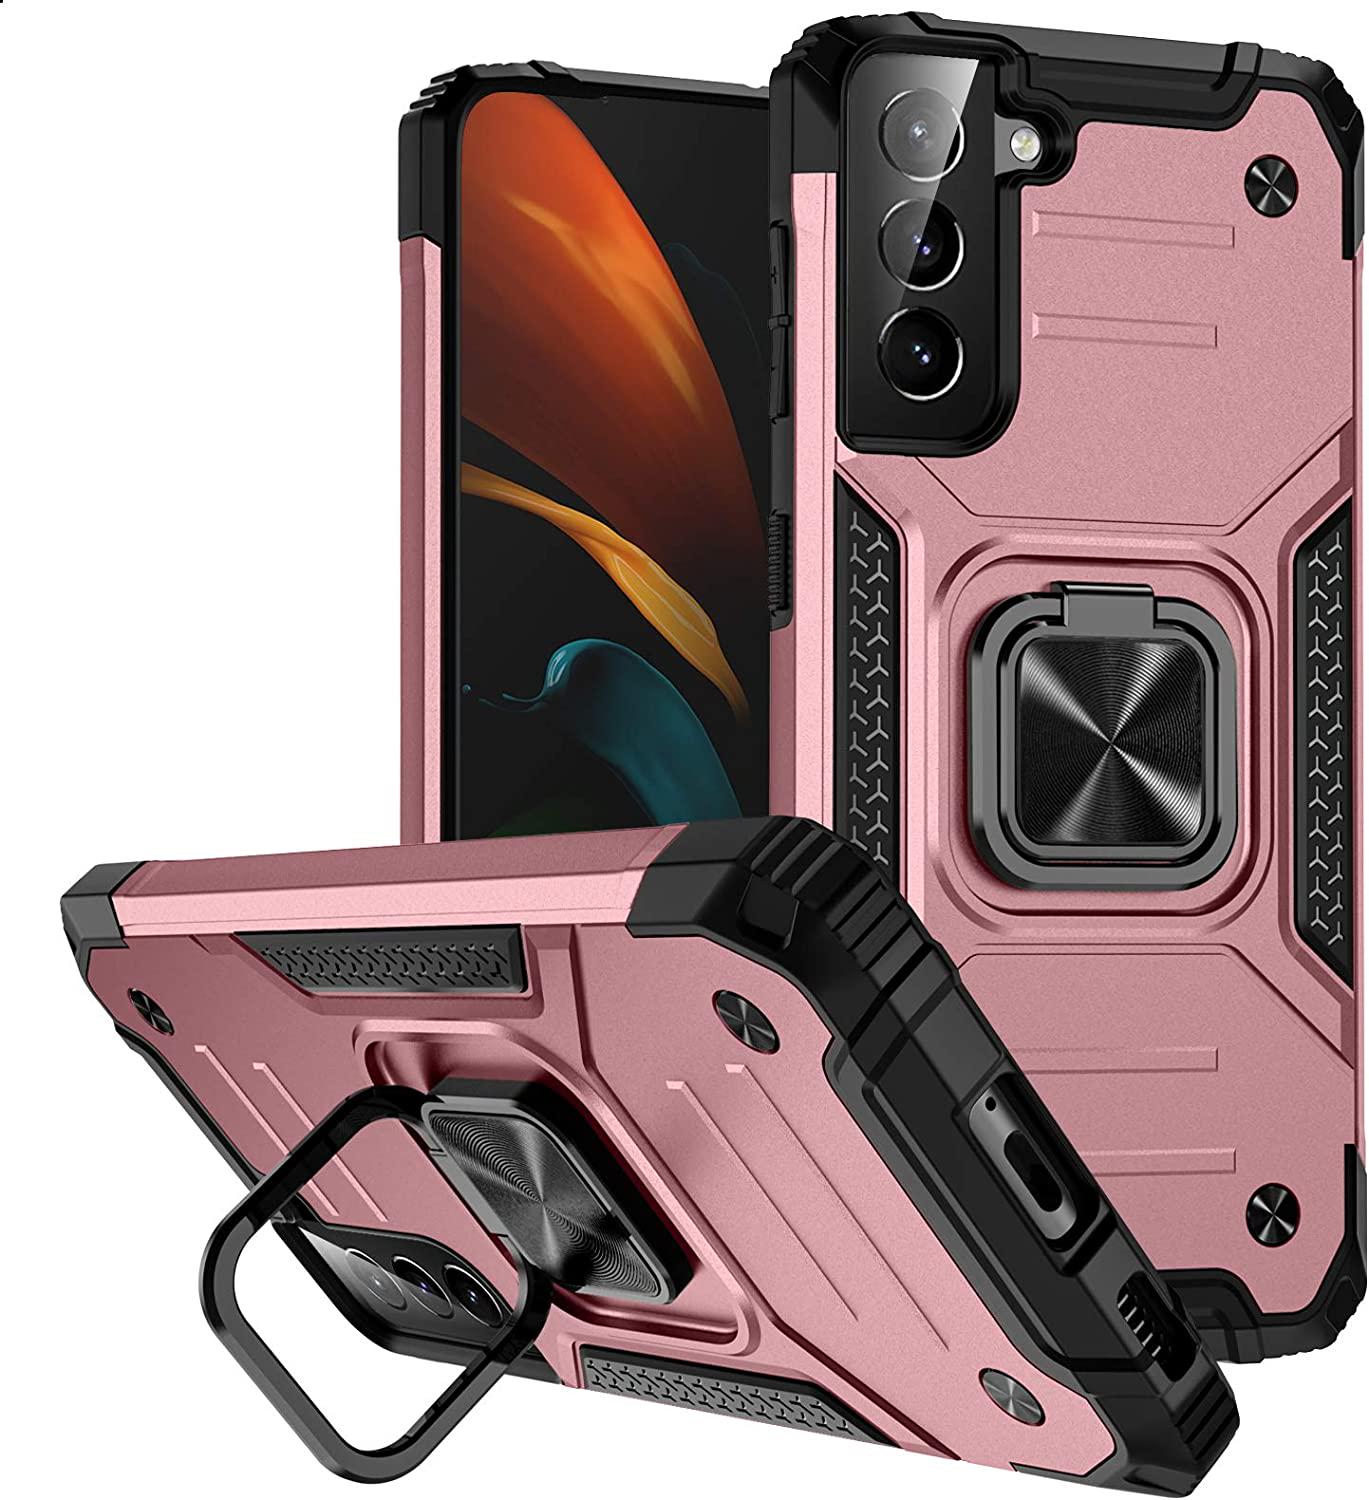 Mastten, Mastten Phone Cases Compatible with Samsung Galaxy S21/S30 6.2 2021,Full Body Heavy Duty Protective Phone Case Cover with Magnetic Car Mount Ring Holder Kickstand, Pink